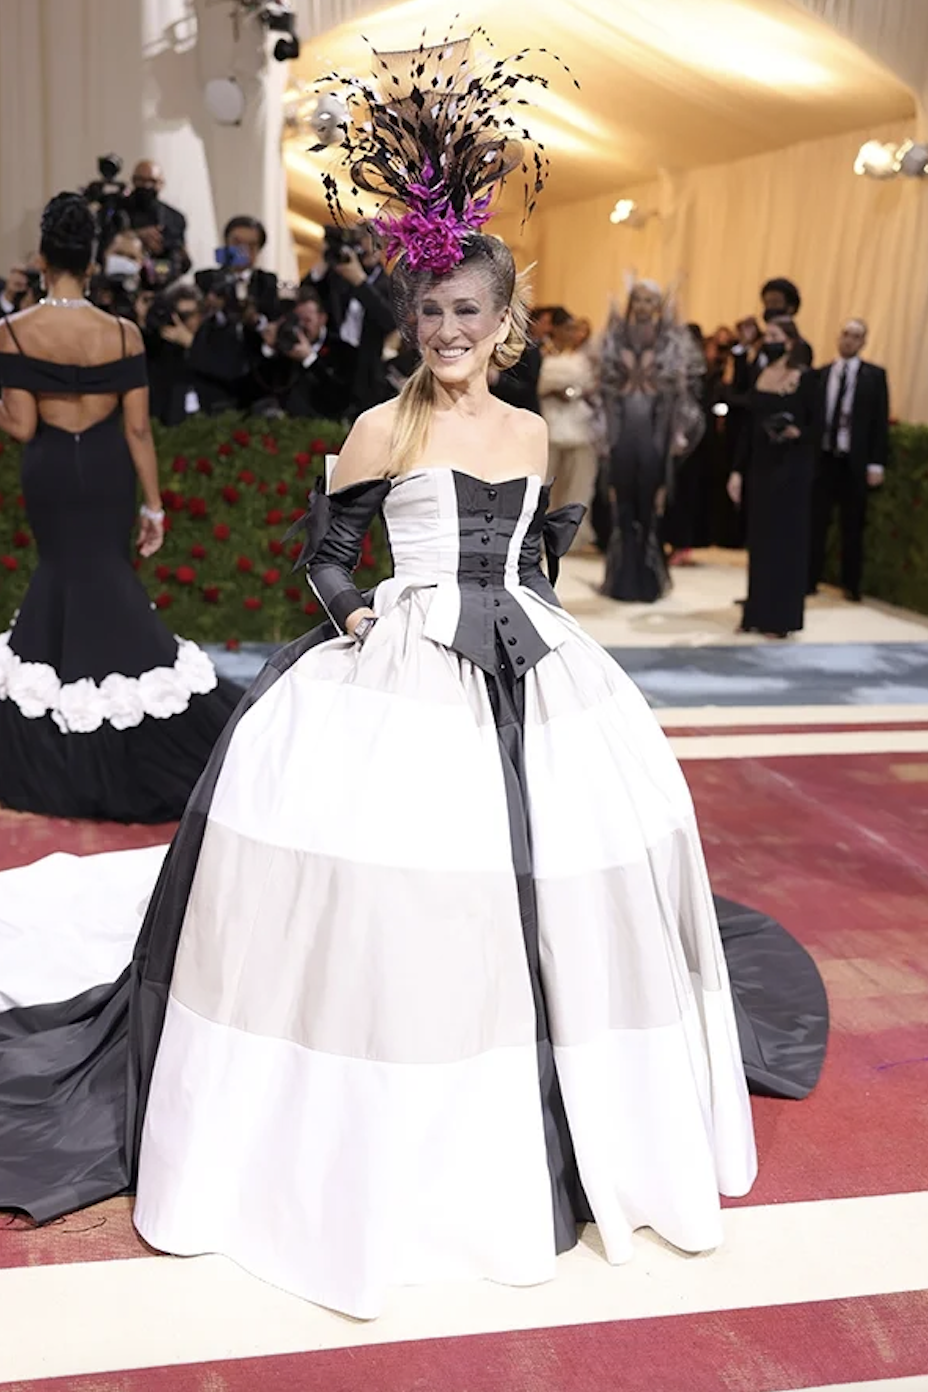 Emma Stone Upcycled Her Wedding Dress For The Met Gala